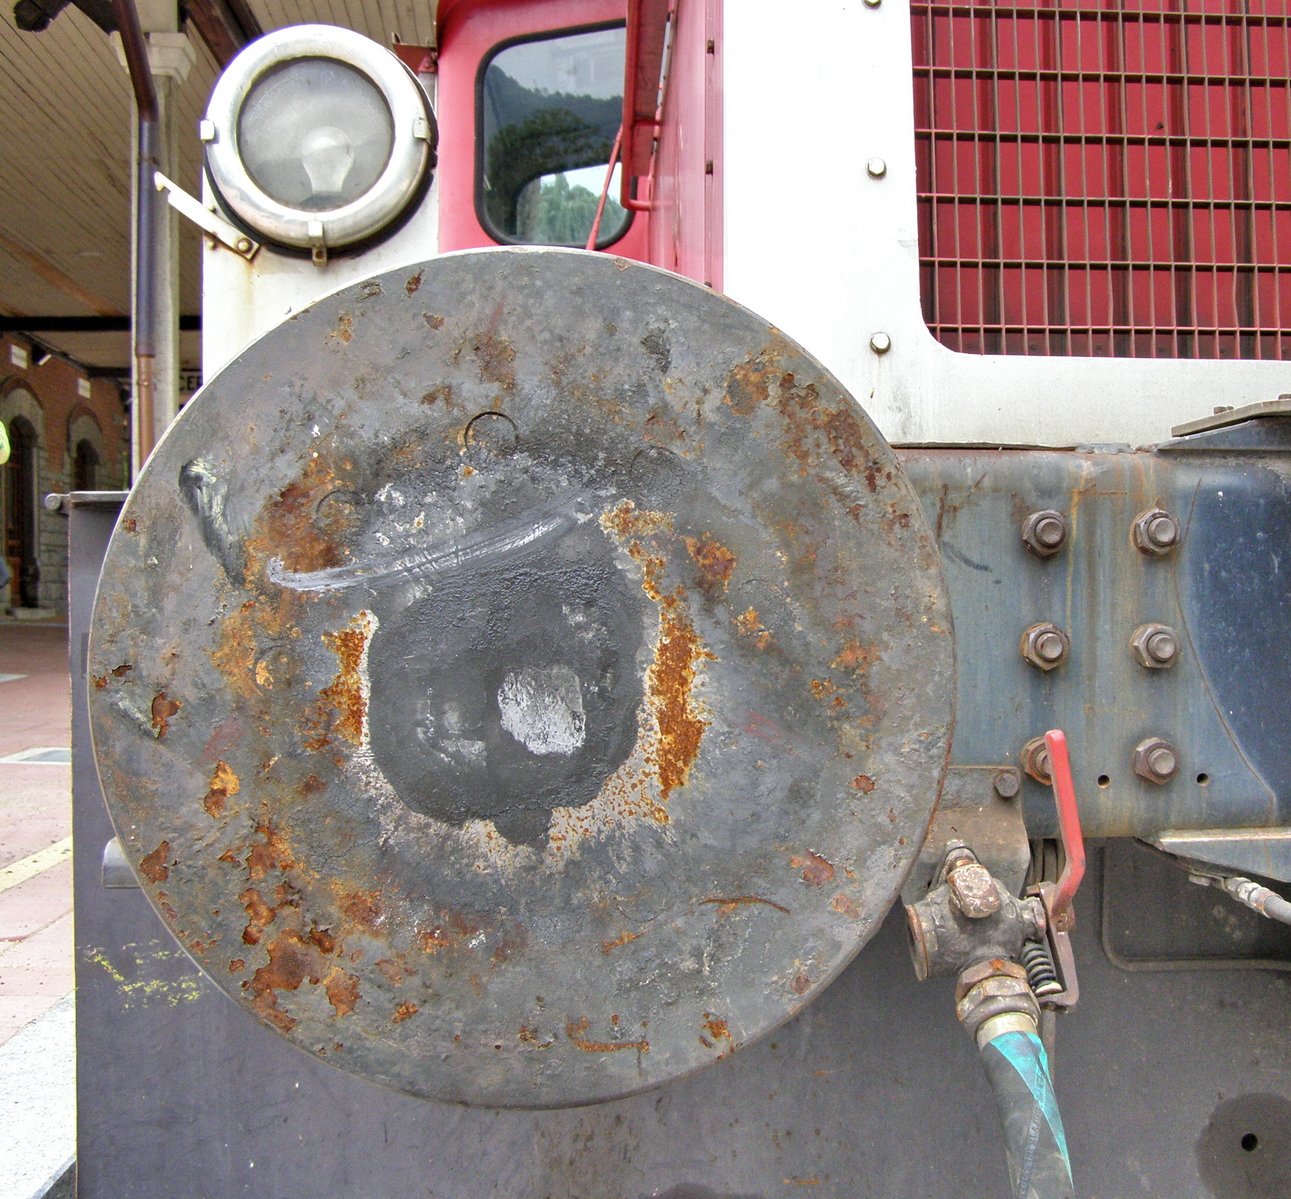 the flat bed of a vehicle, with a rusted metal disc